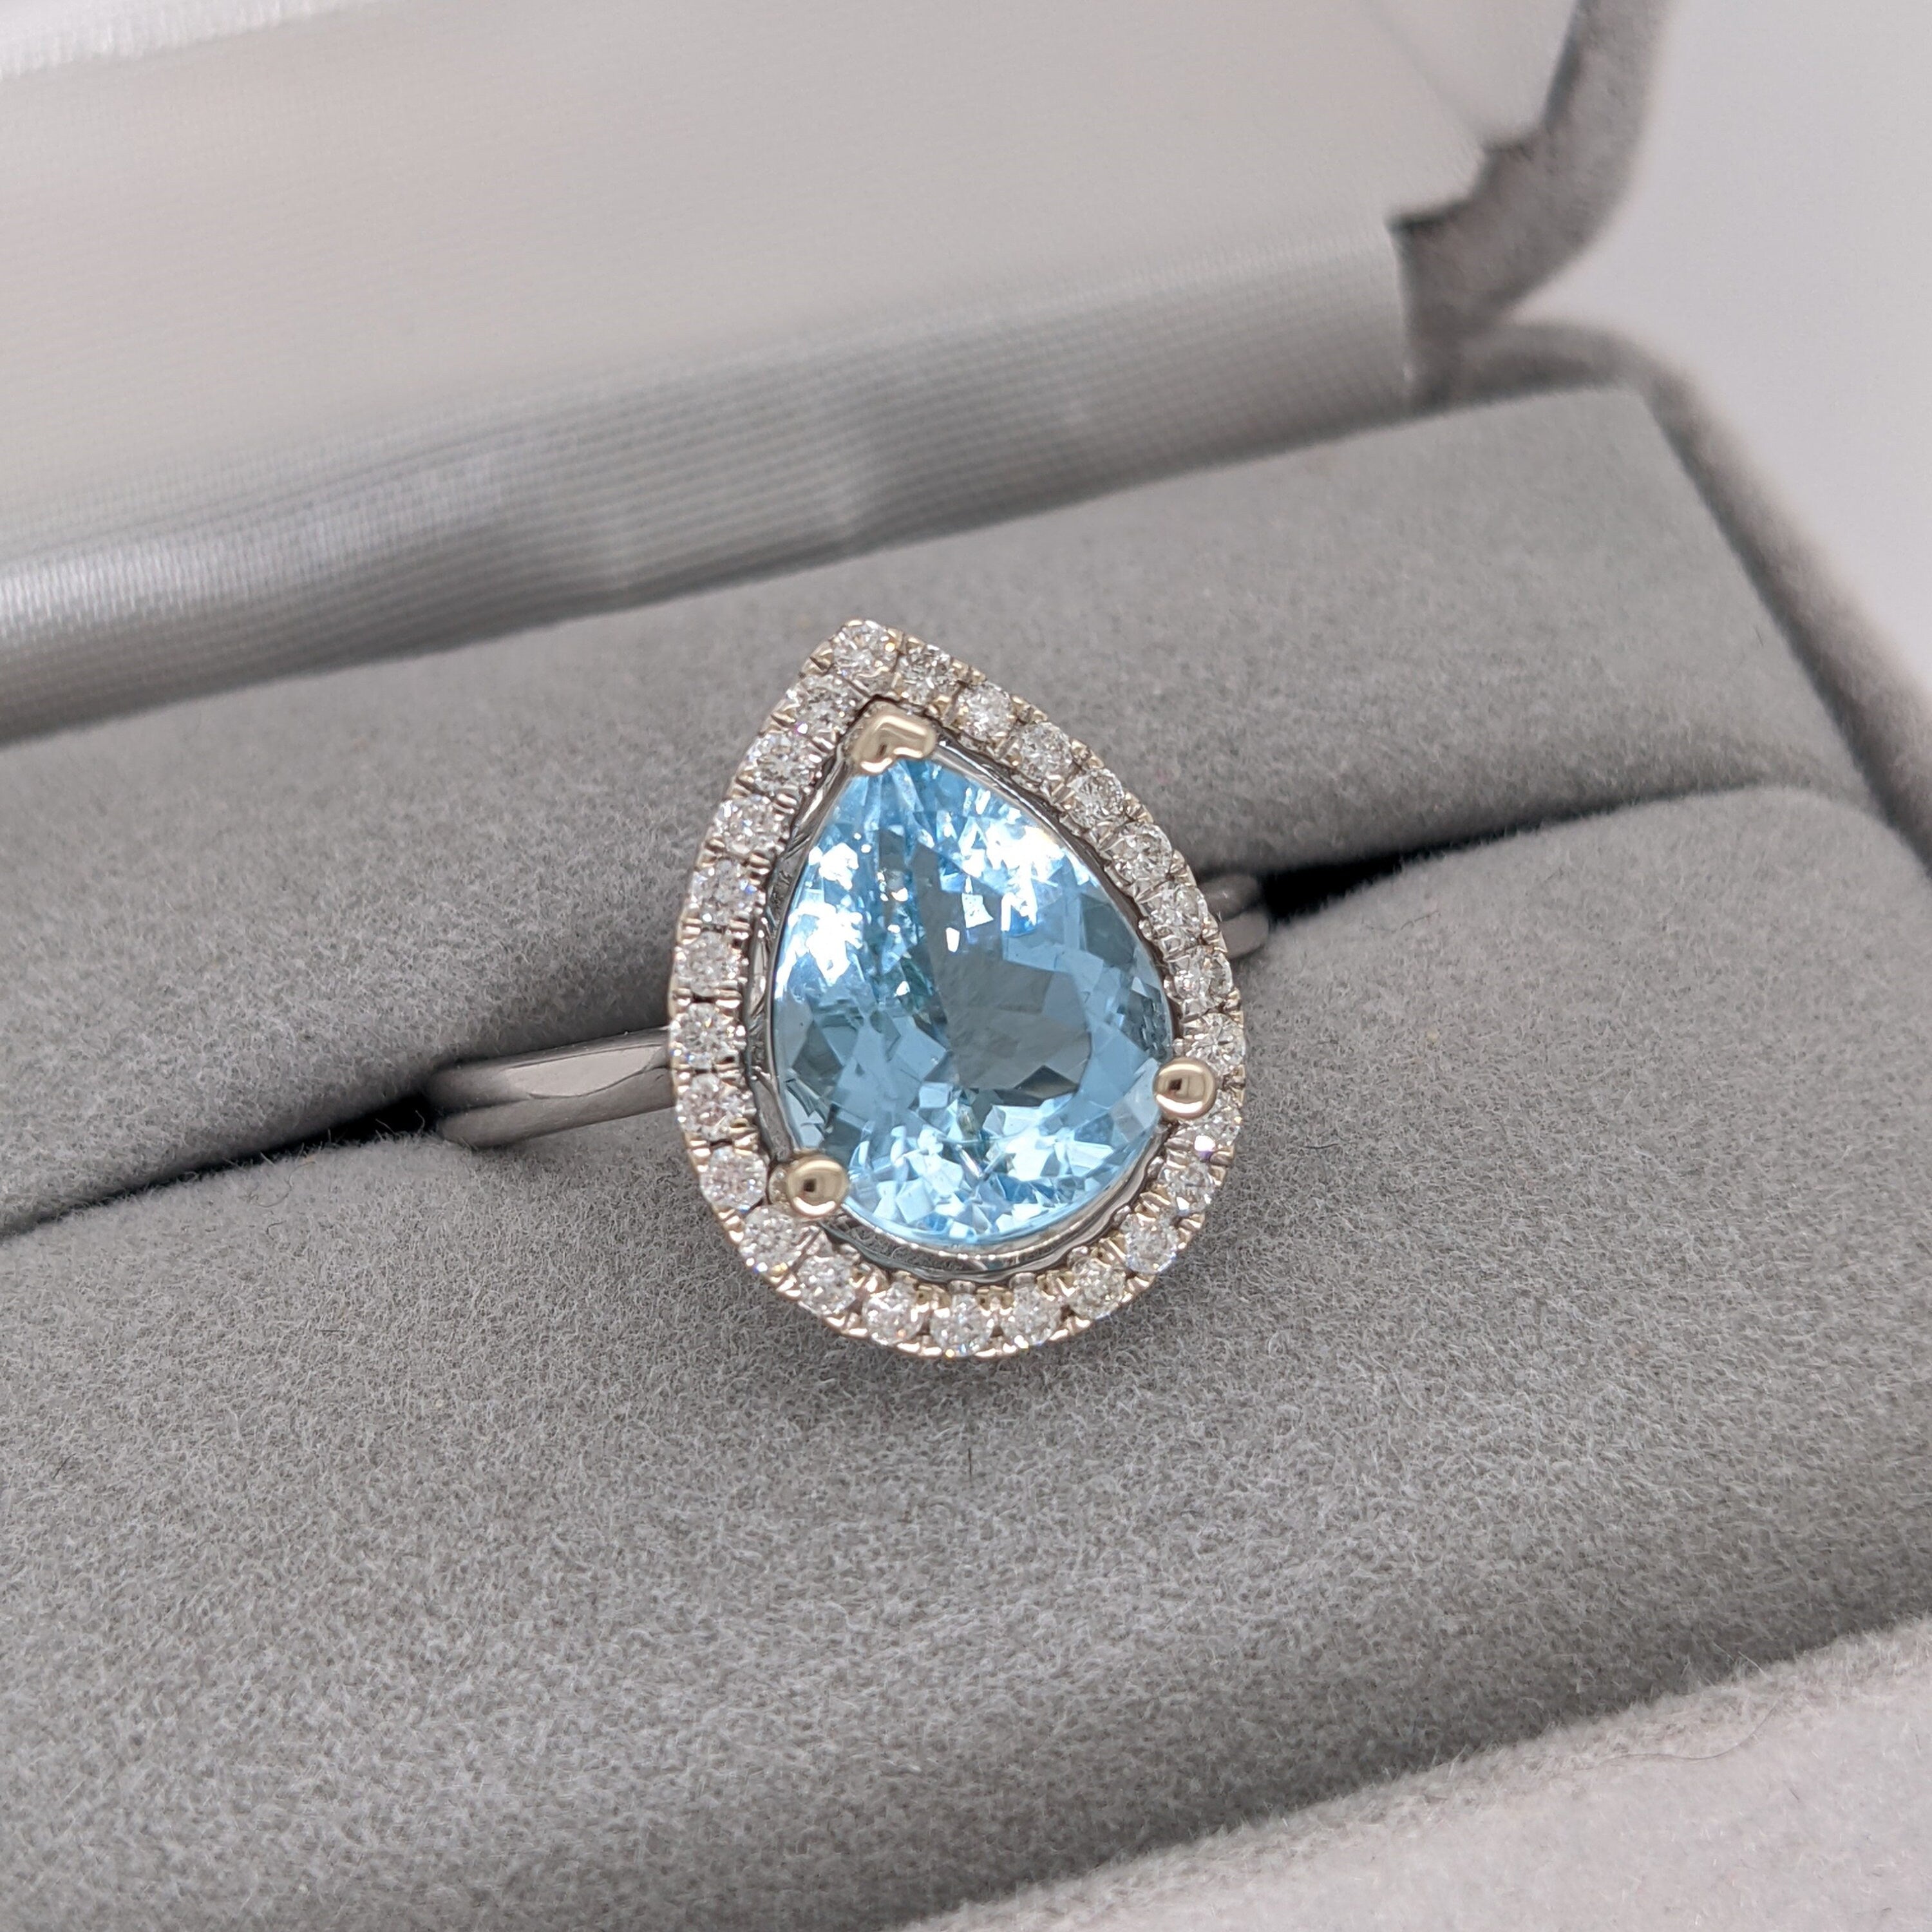 Stunning Aquamarine Ring in Solid 14K White Gold with a Halo of Natural Diamonds | Pear 11x8mm | Natural | Gemstone Jewelry | March Birthday